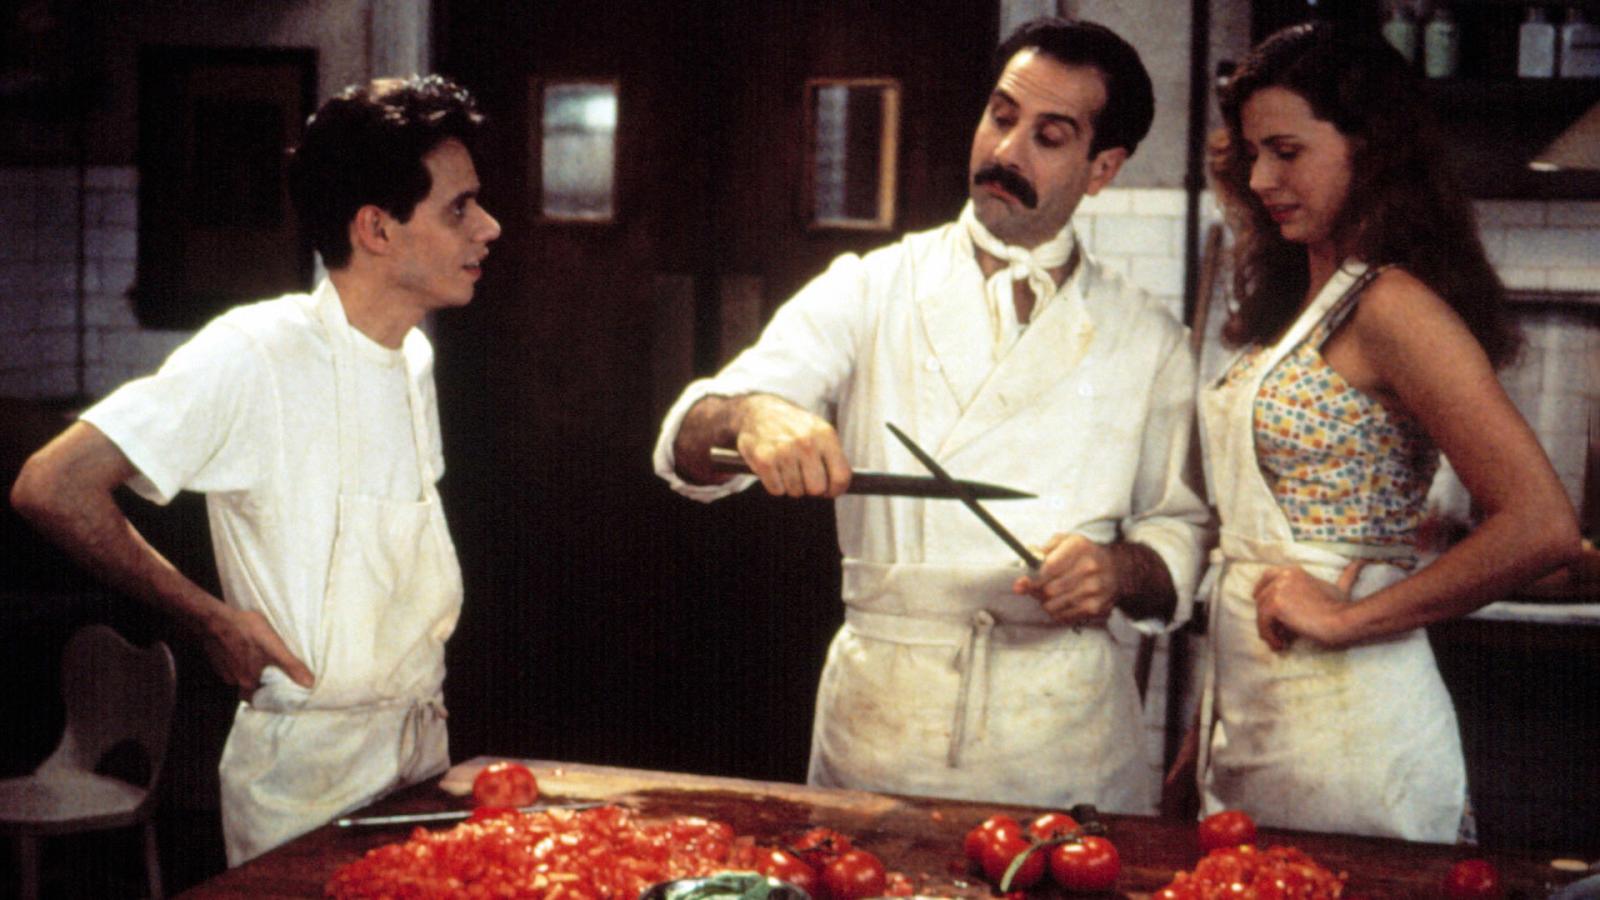 5 Delicious Cooking Movies That Will Make You Drool over the Plot as Much as the Food - image 2